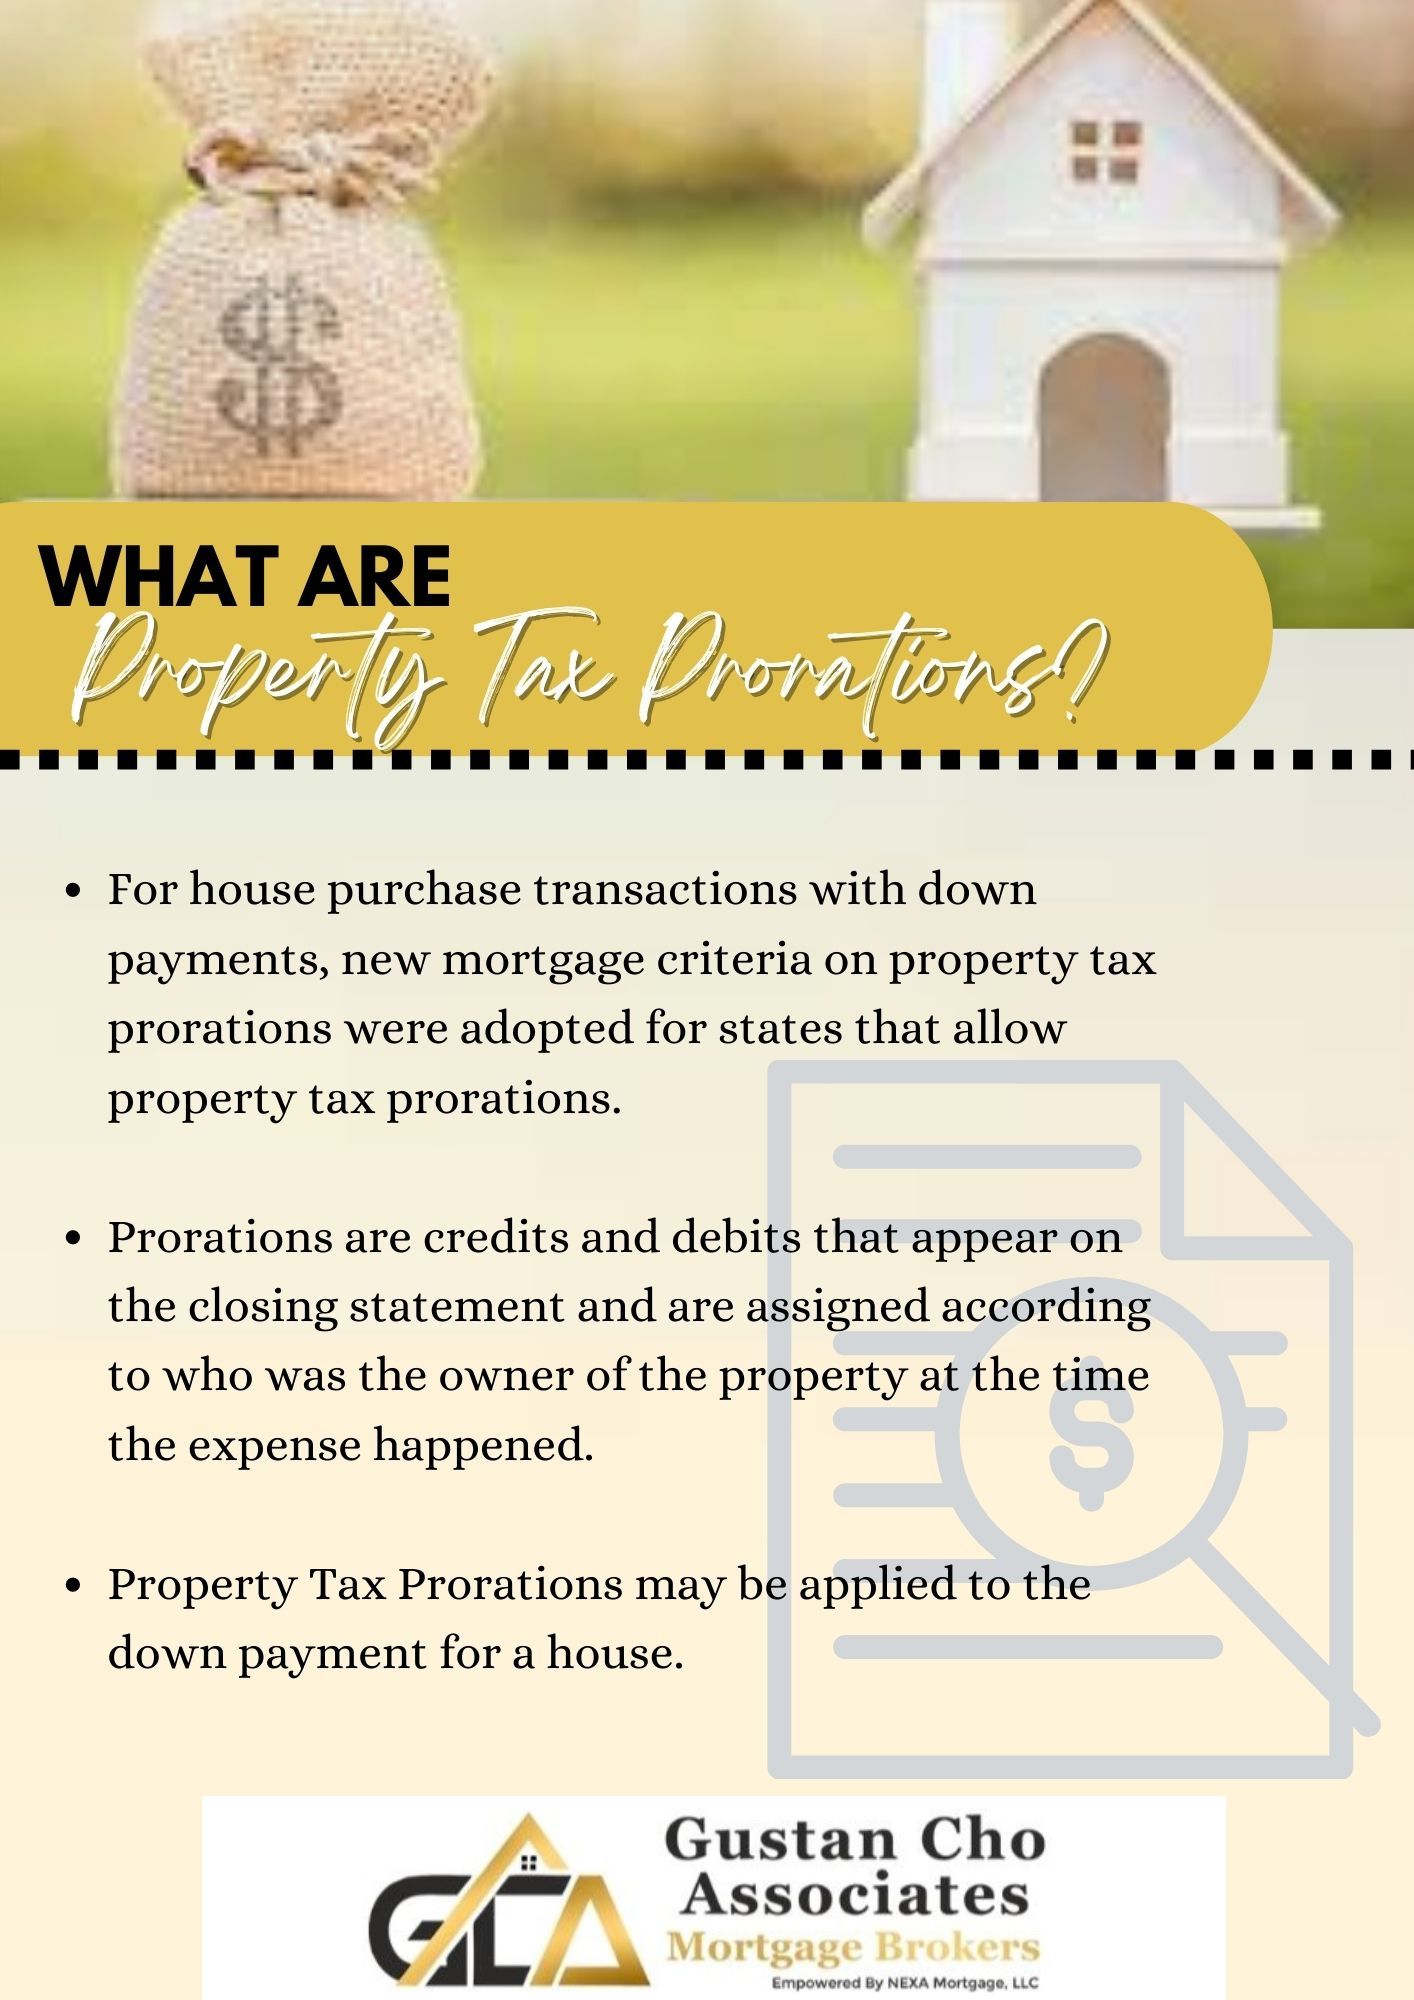 What Are Property Tax Prorations